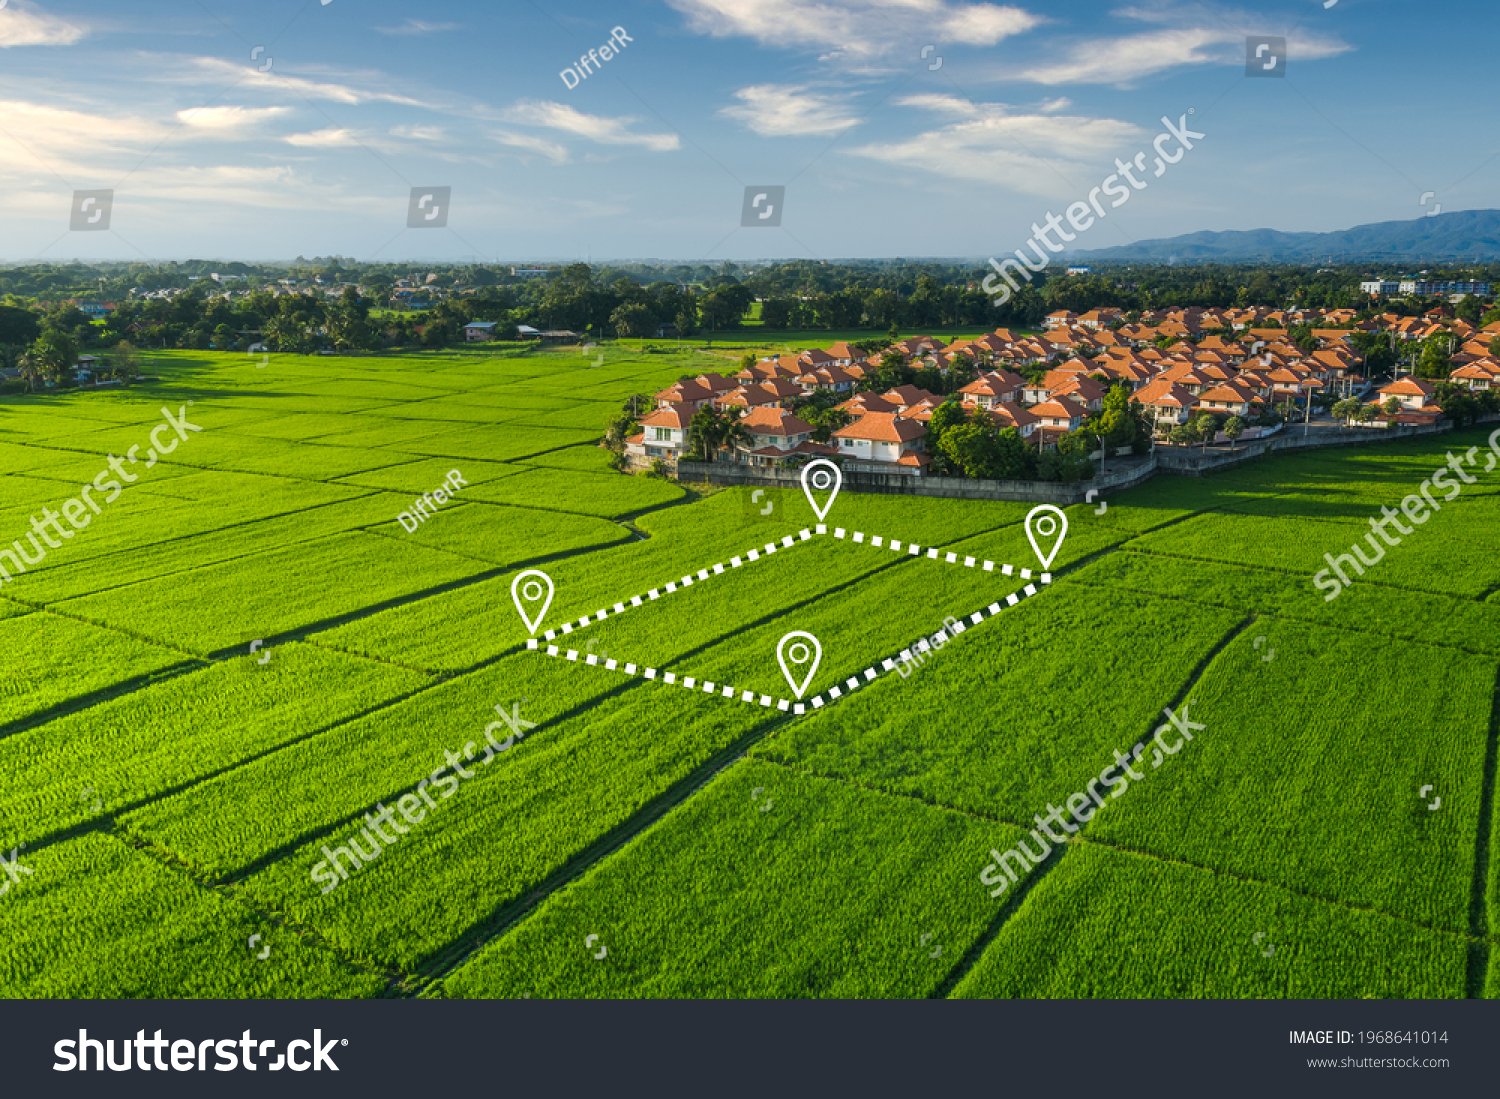 stock-photo-land-plot-in-aerial-view-identify-registration-symbol-of-vacant-area-for-map-that-property-real-1968641014